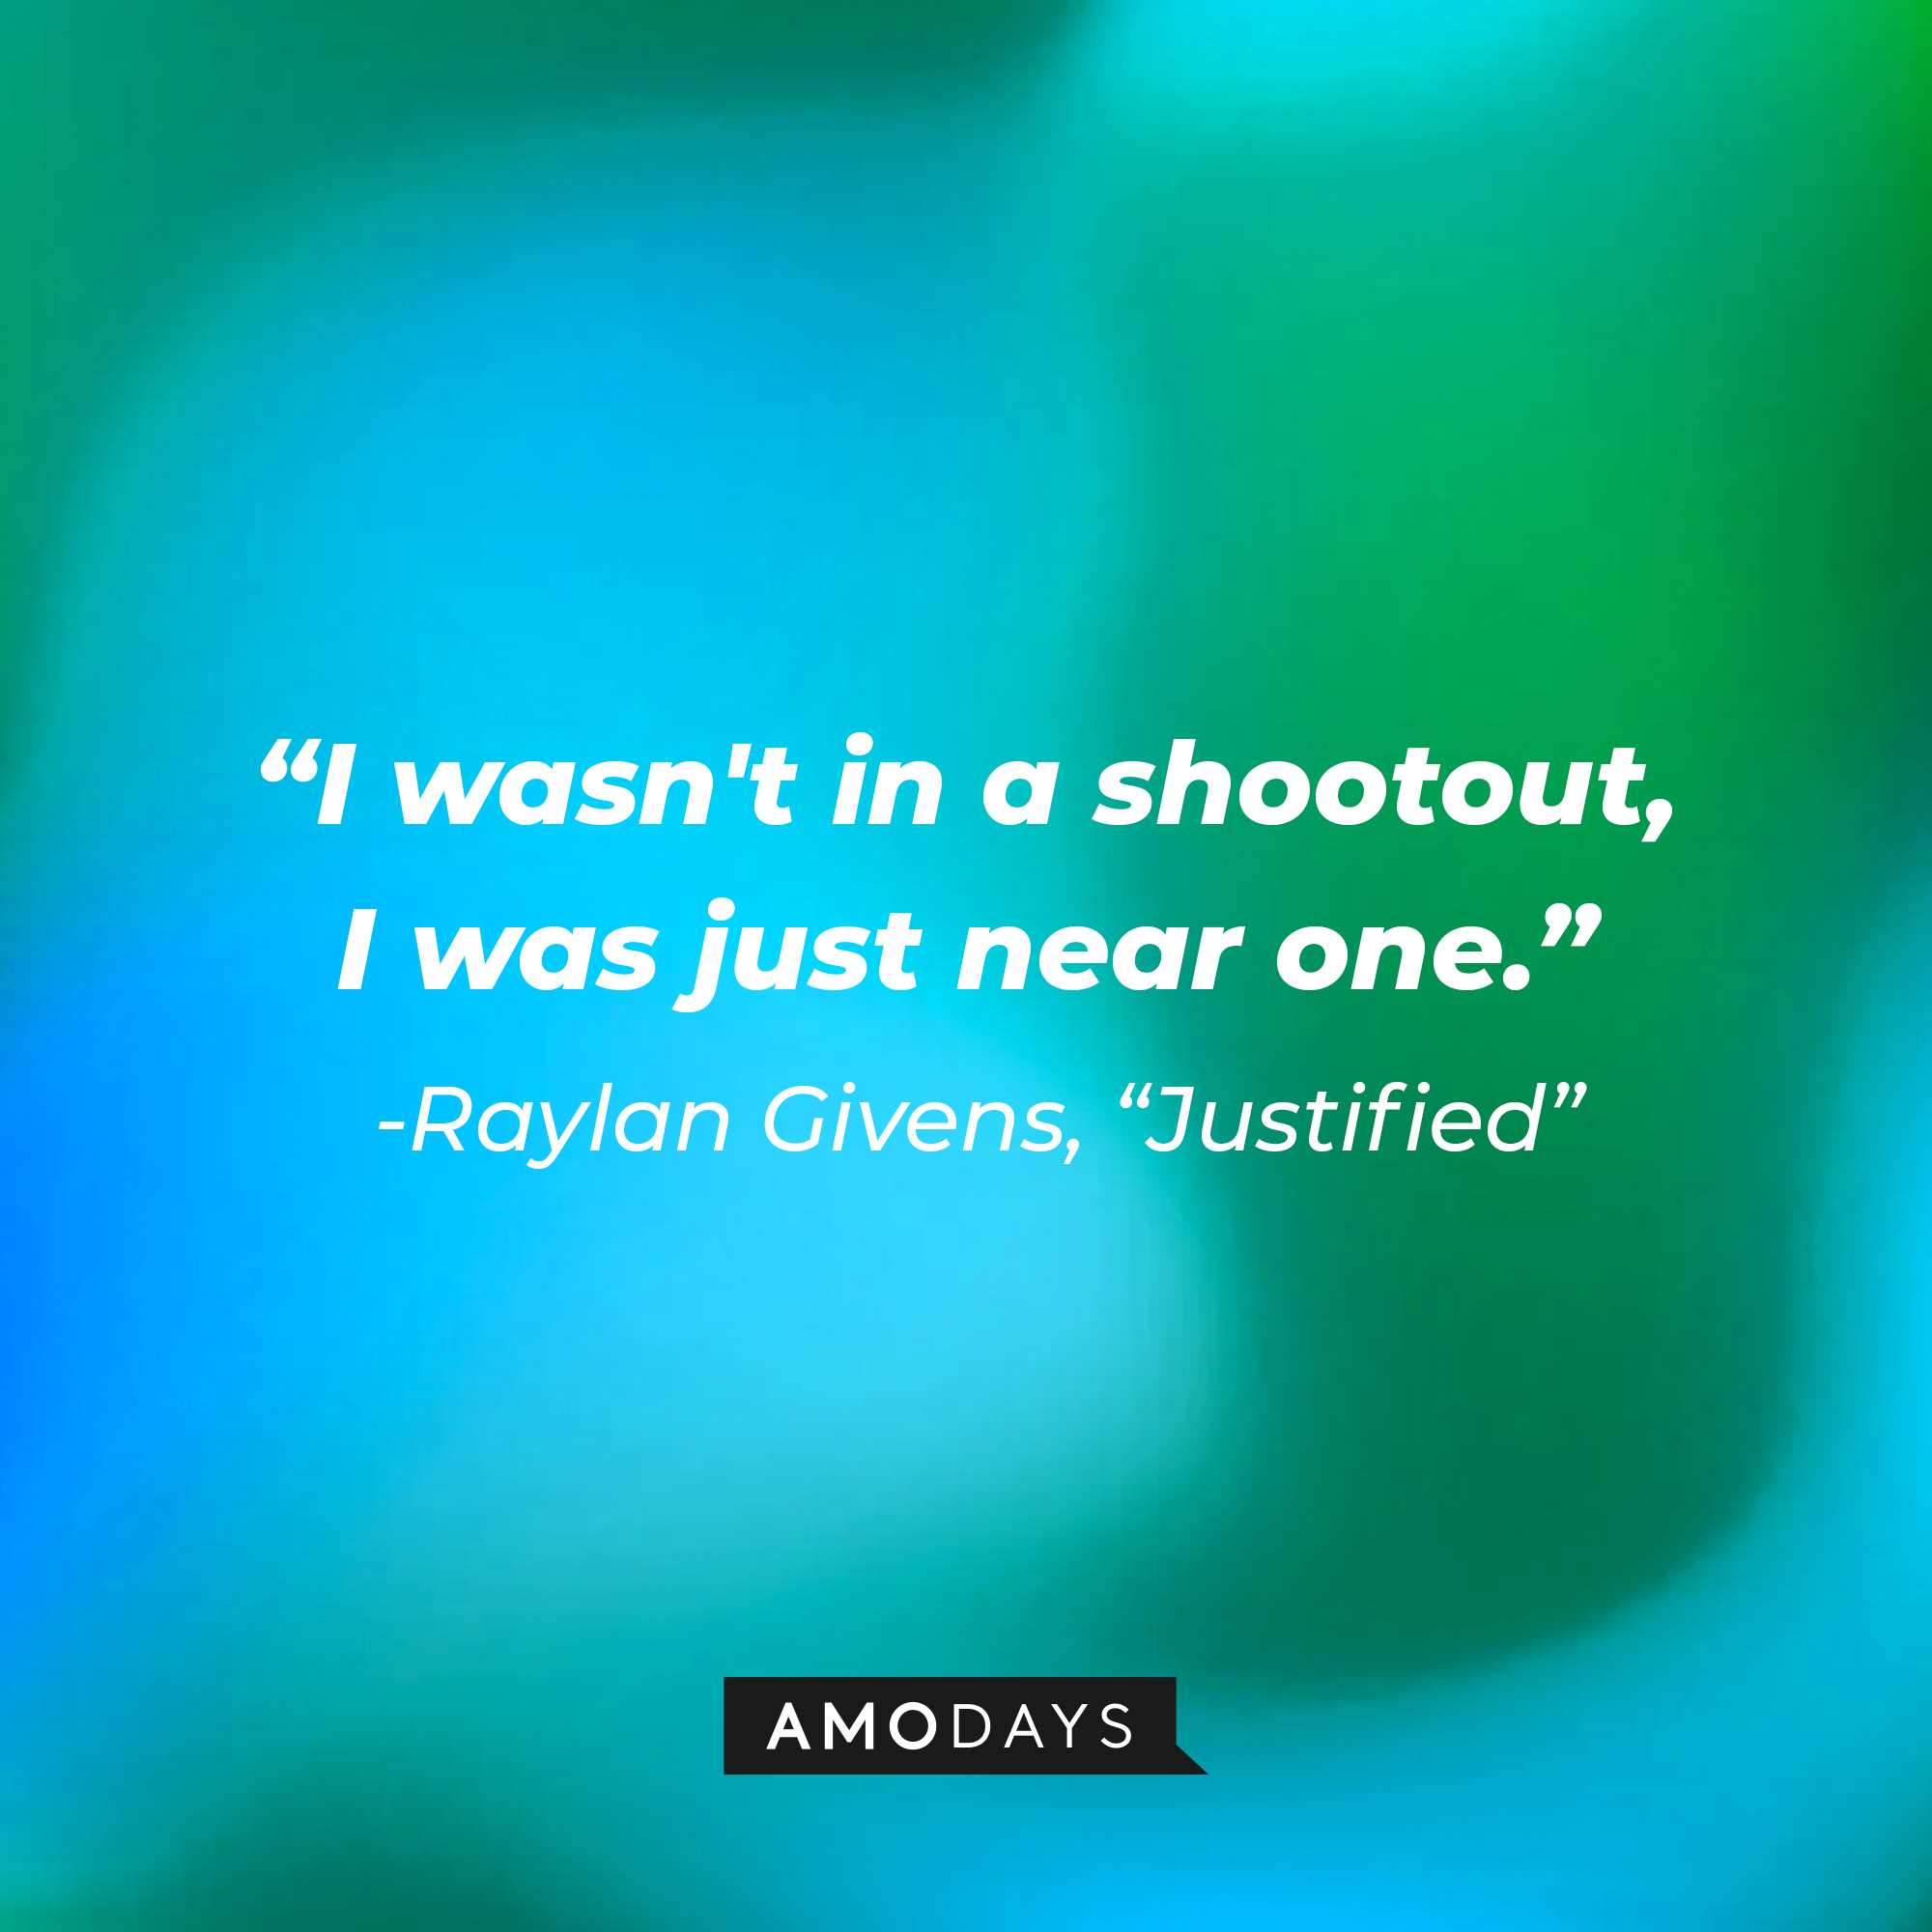 Raylan Givens’ quote from “Justified”: “I wasn't in a shootout, I was just near one.” | Source: AmoDays